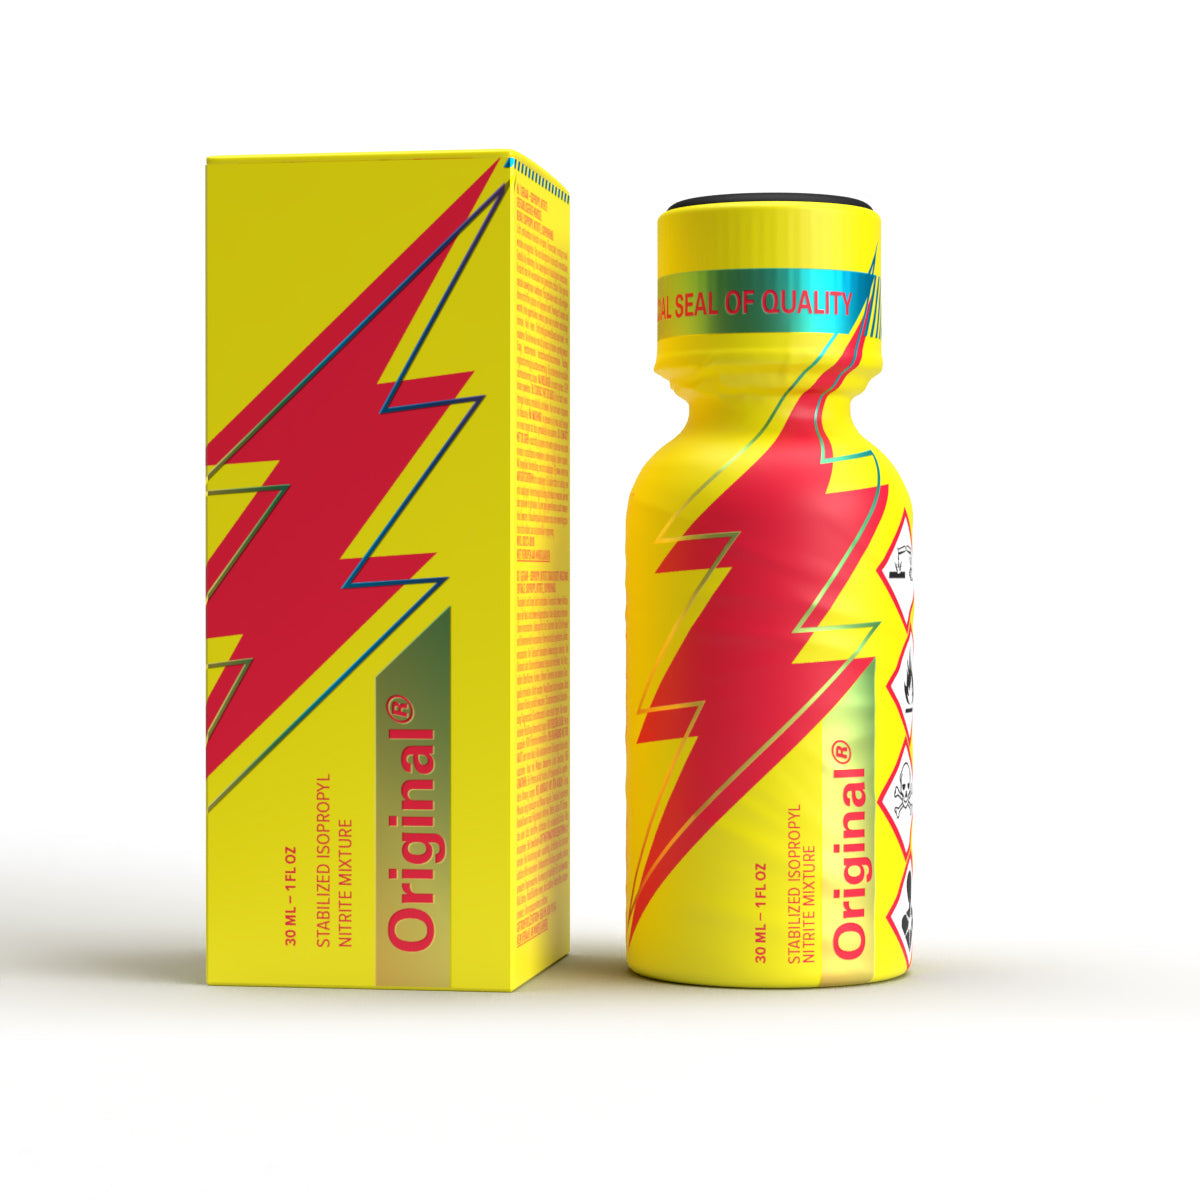 A product photo of a 30ml bottle of Original Poppers.